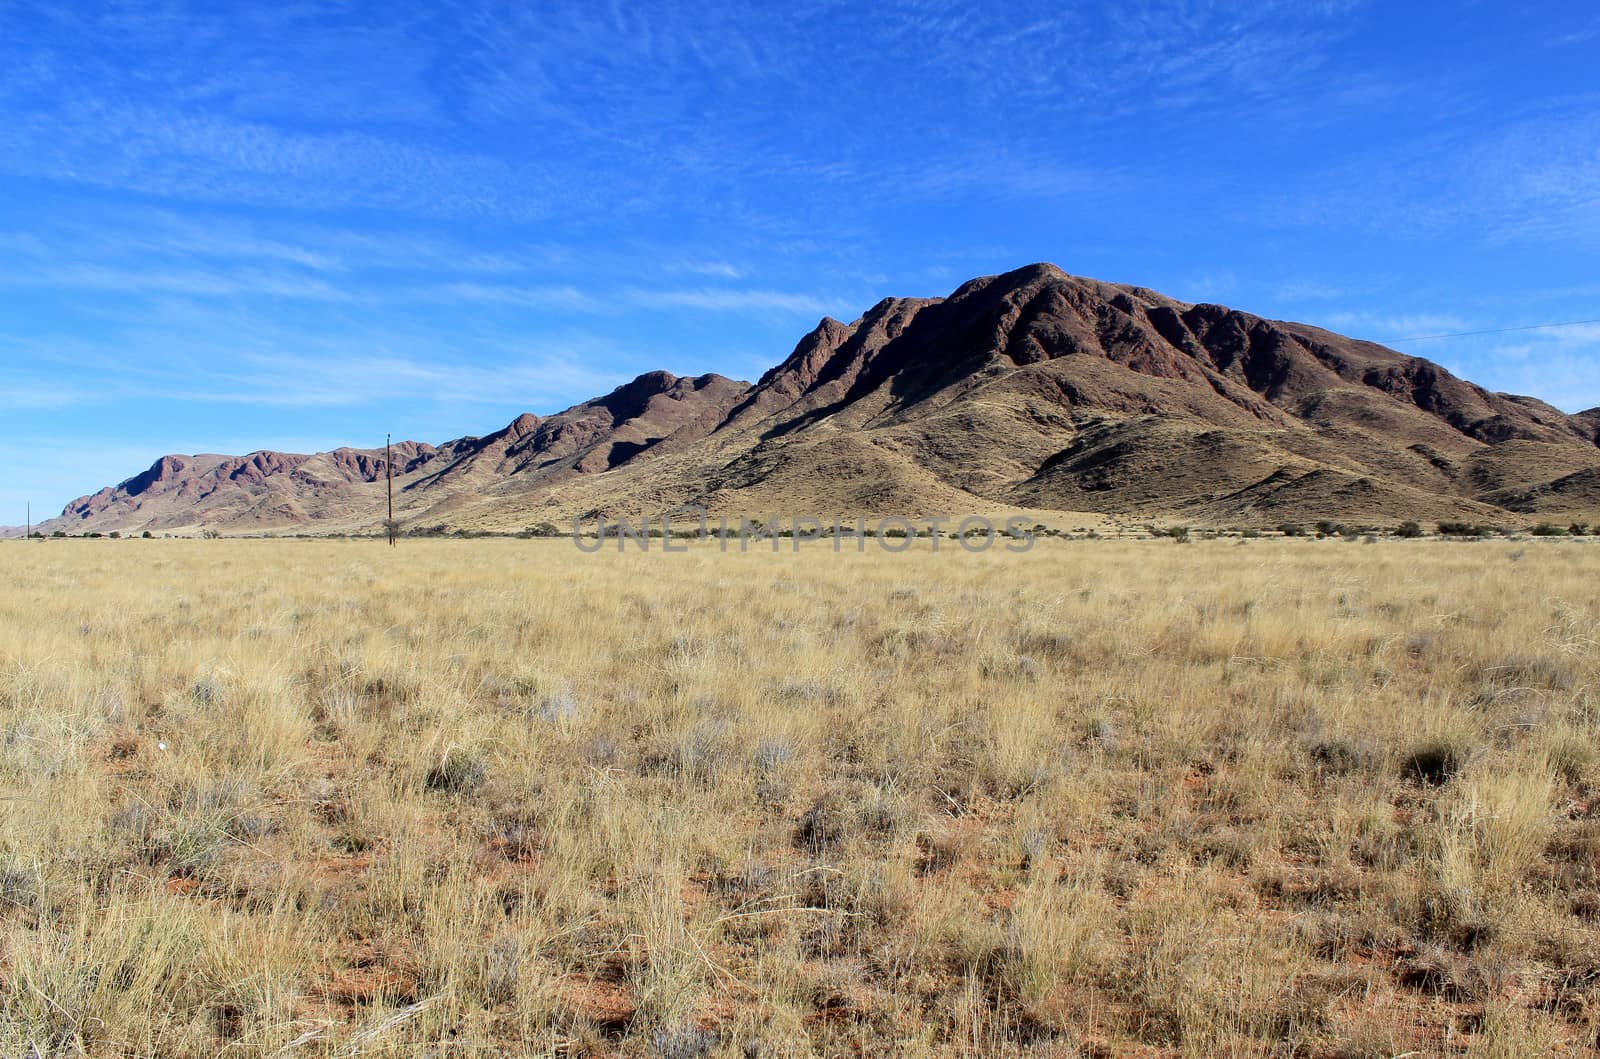 Grassy Savannah with mountains in background, Namib Naukluft Par by ptxgarfield